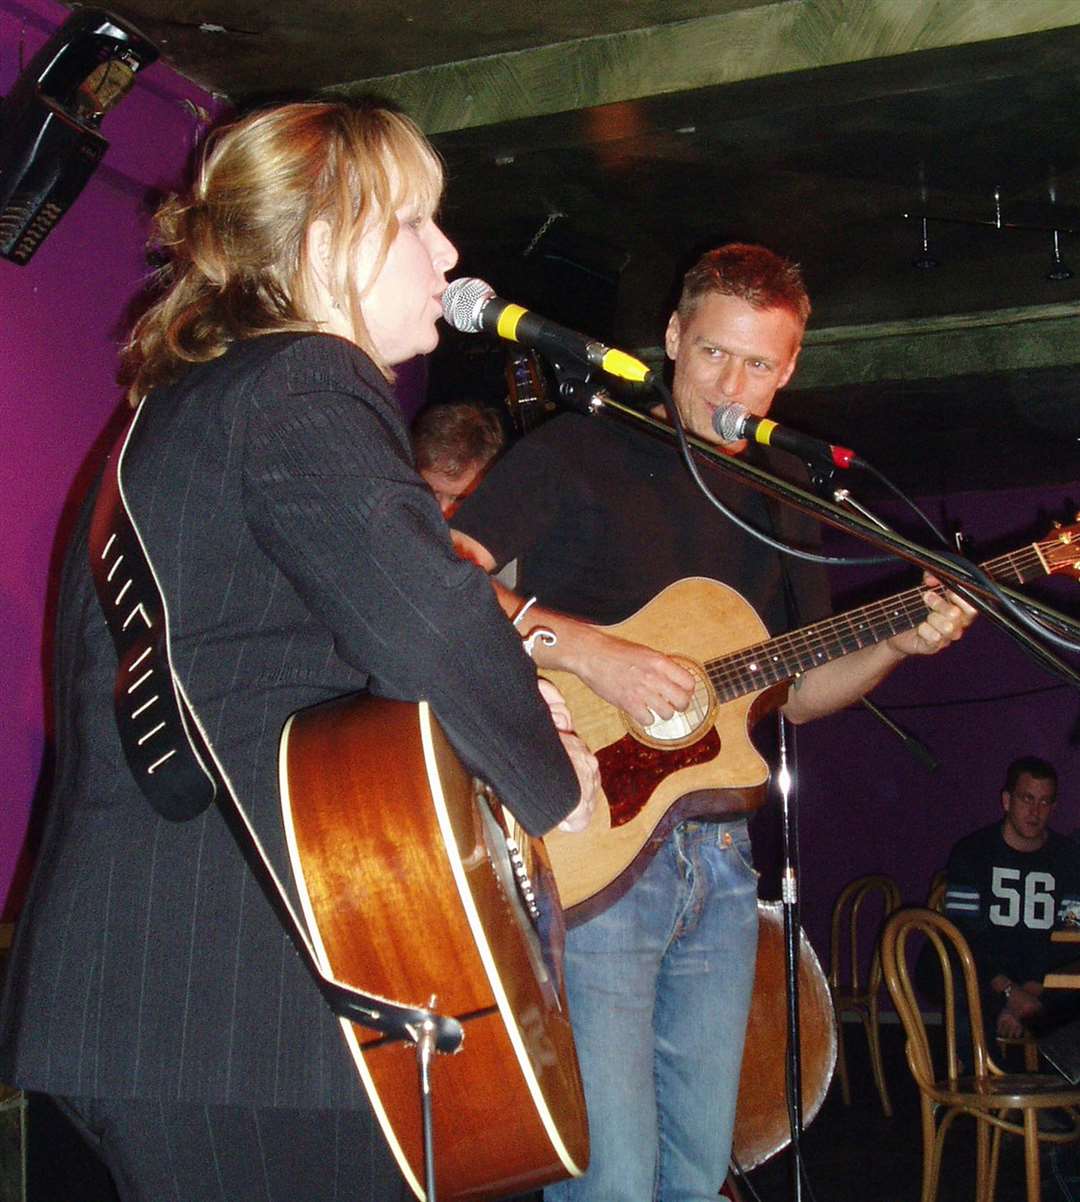 Rockstar Bryan Adams and Gretchen Peters on stage at Mu Mu, or the Jazz and Blues Café, as it was known then Picture: Maverick